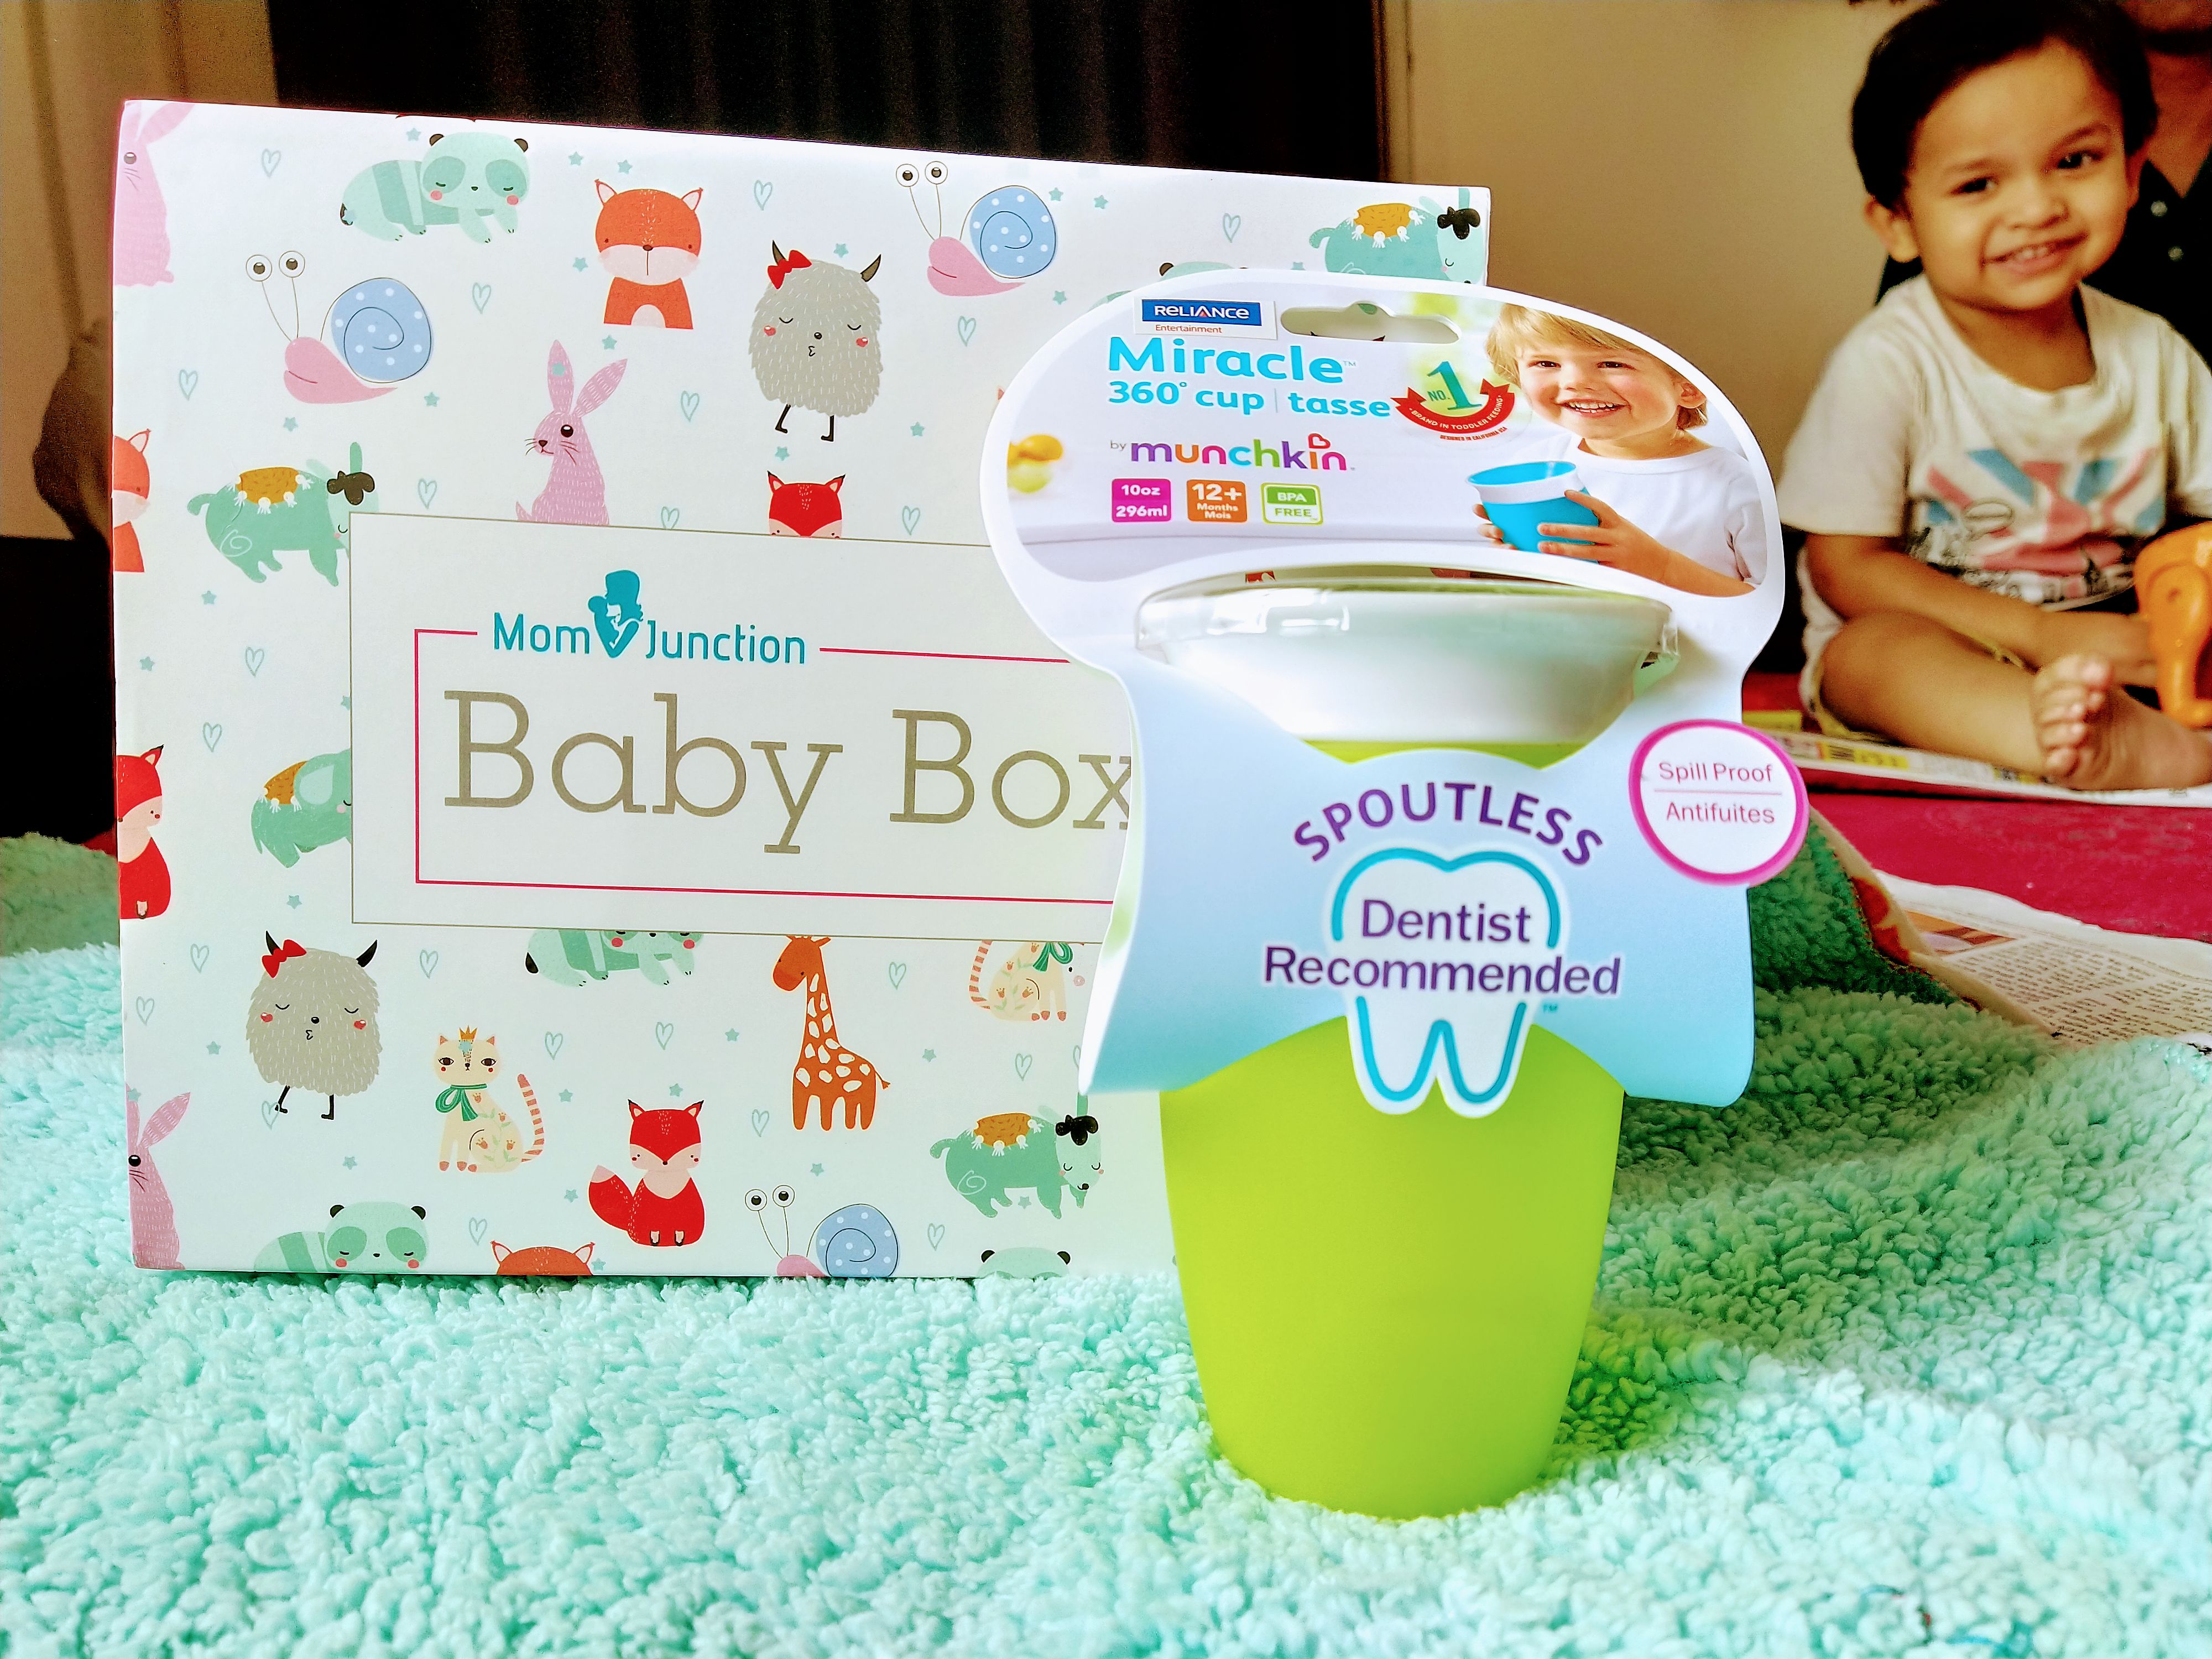 Munchkin Miracle 360-A perfect For babies-By madhura